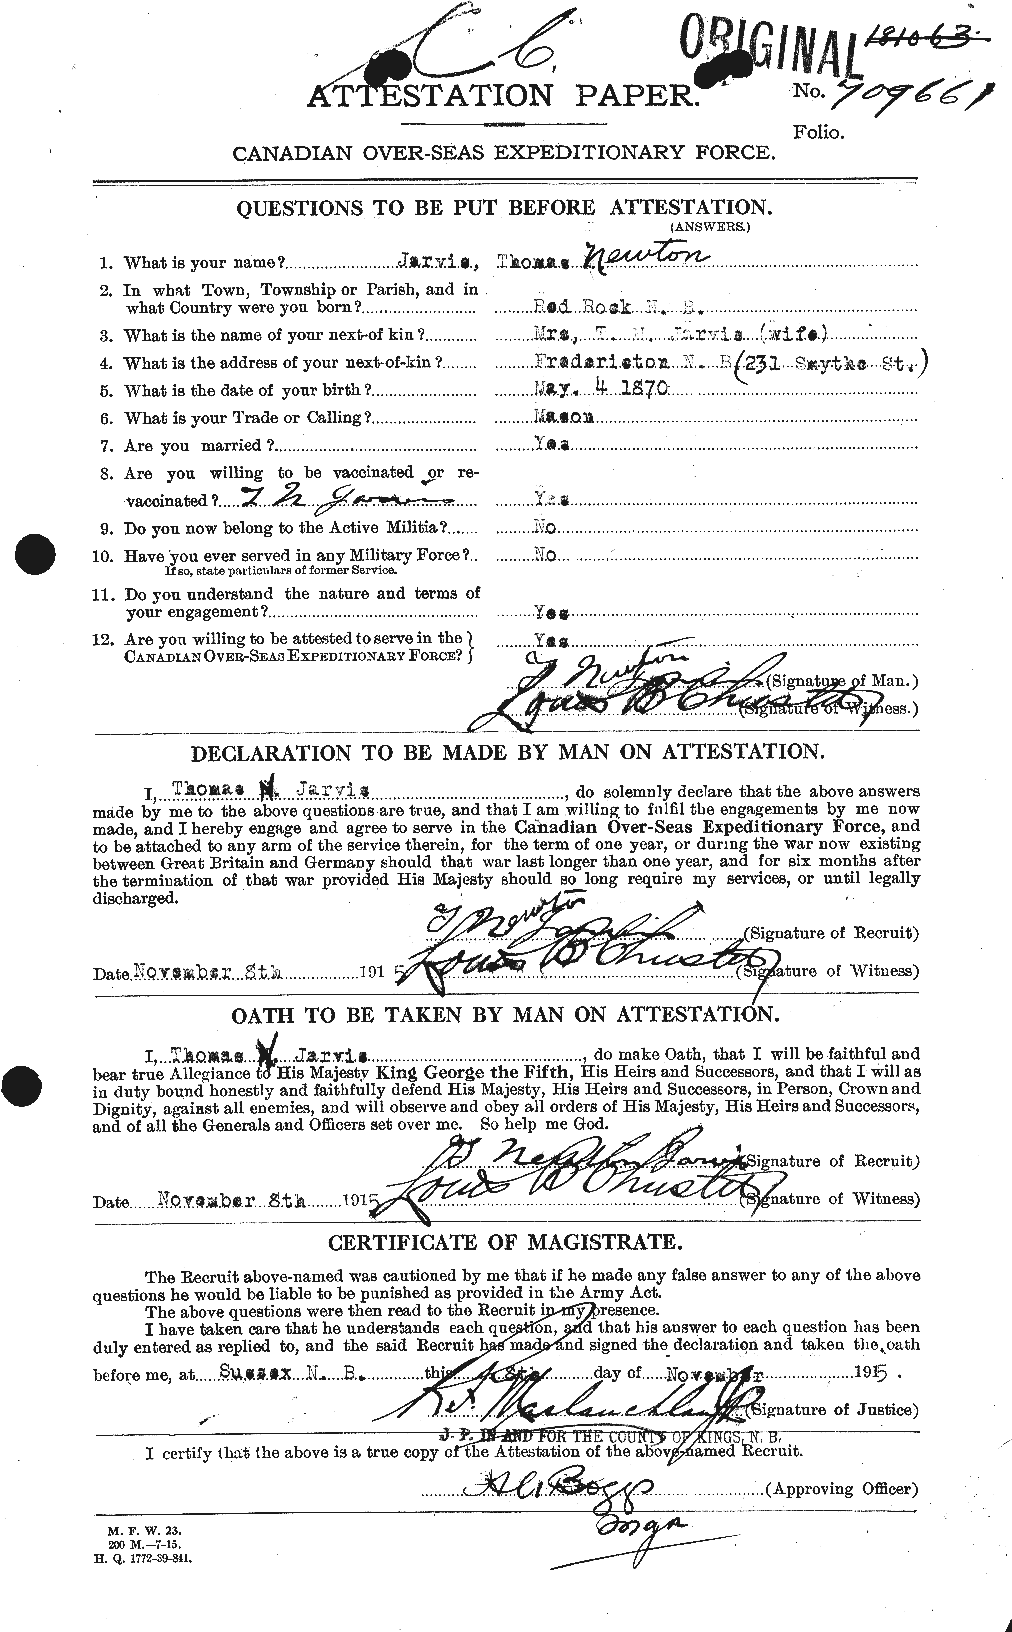 Personnel Records of the First World War - CEF 415864a